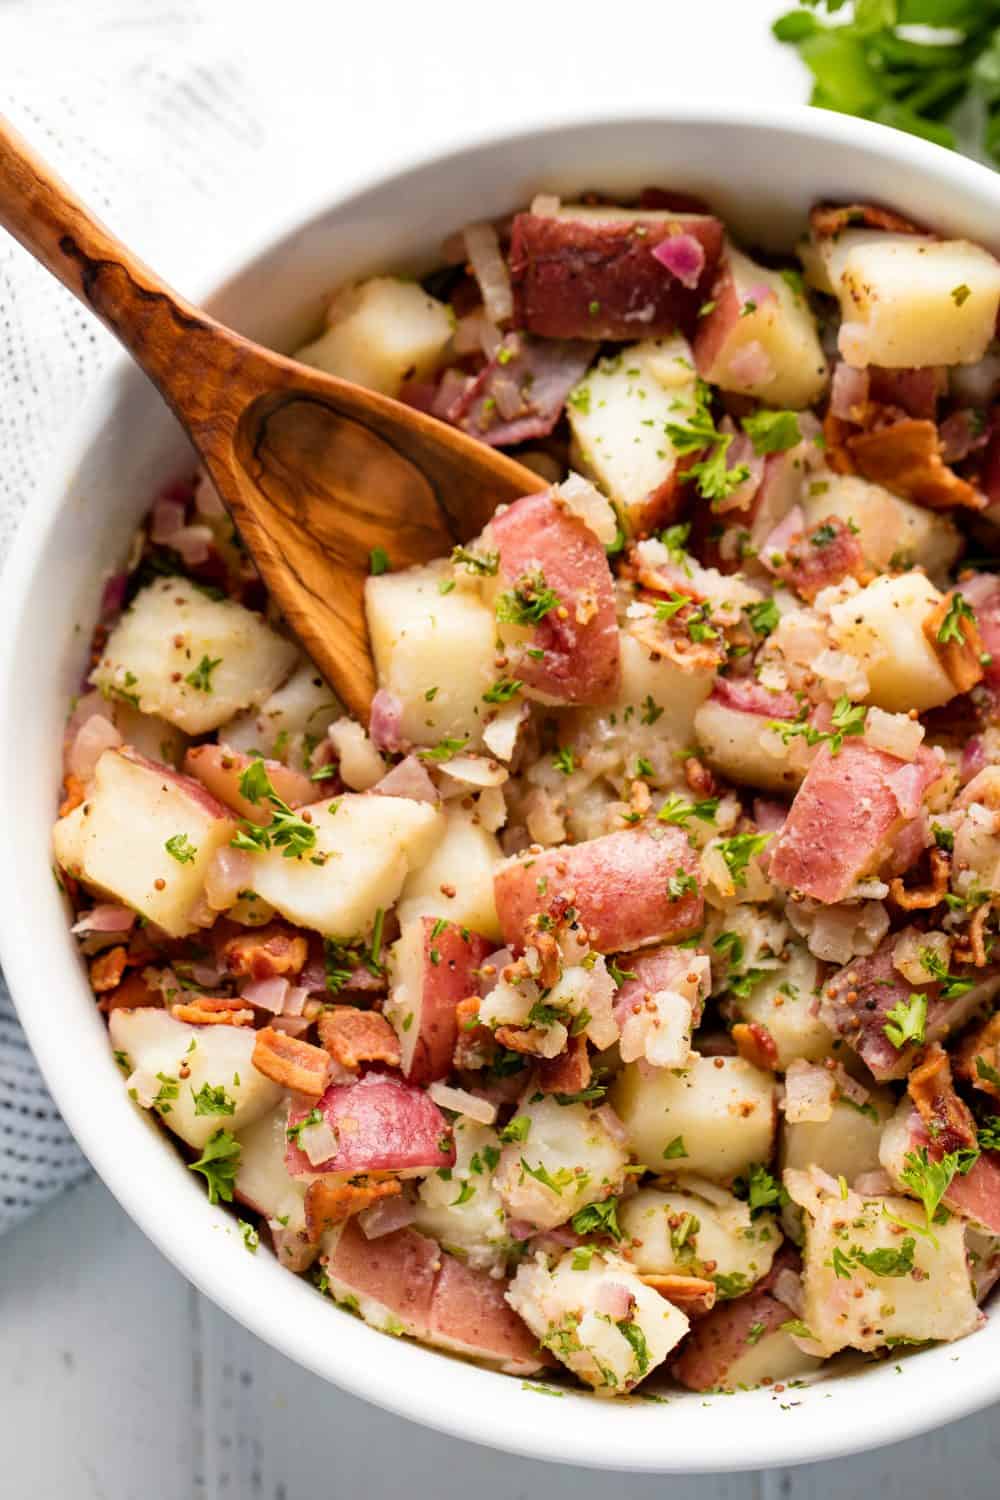 German Potato Salad in a white bowl with a wooden spoon in it.